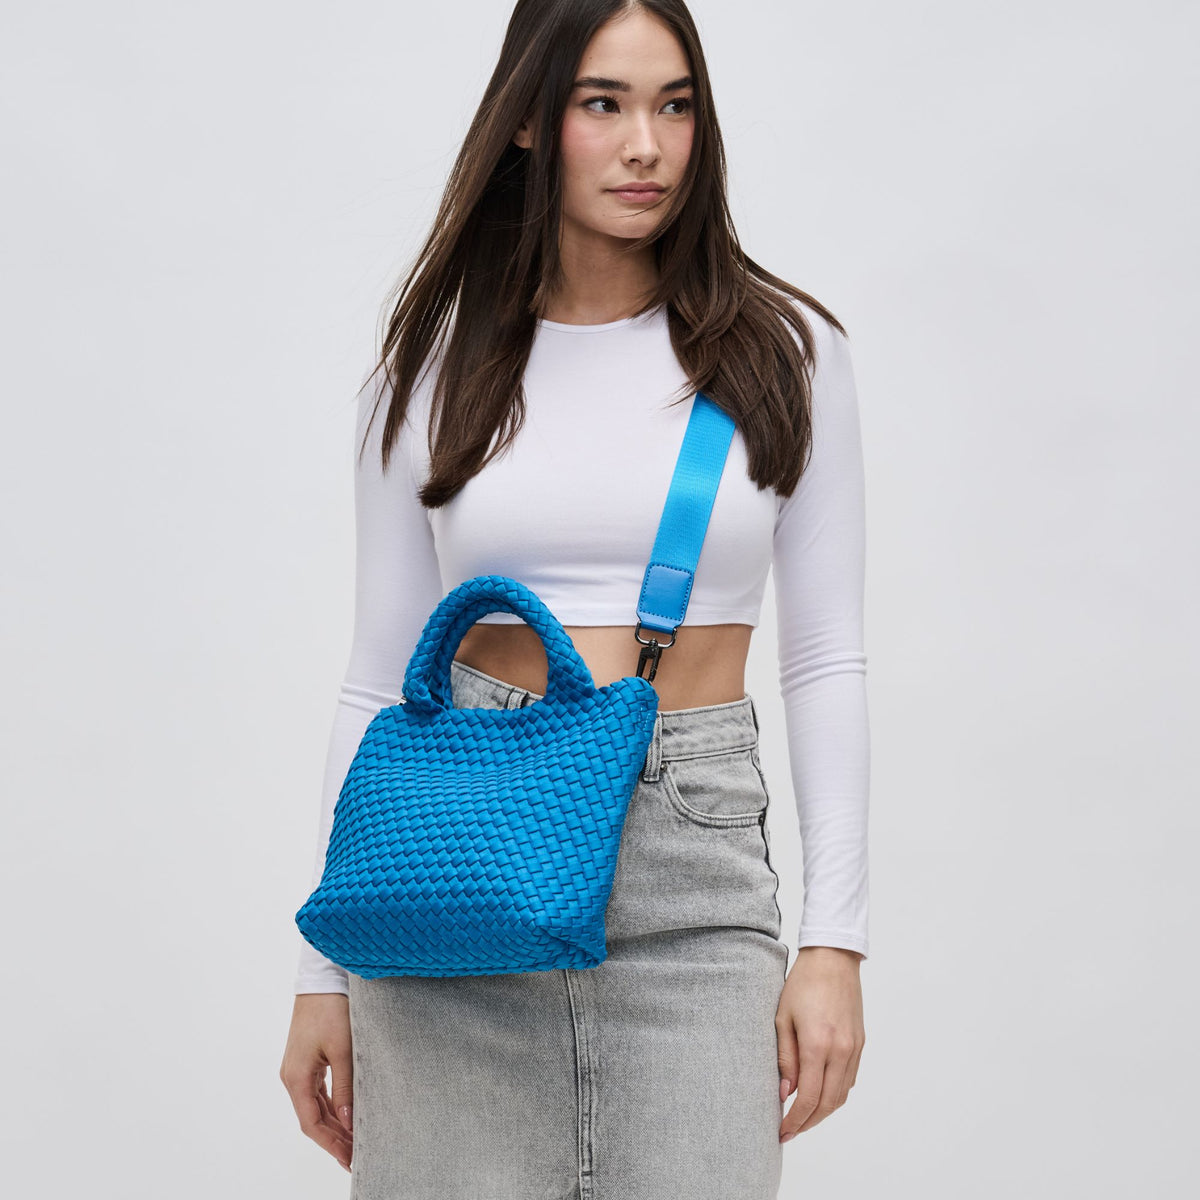 Woman wearing Ocean Sol and Selene Sky's The Limit - Small Crossbody 841764109017 View 1 | Ocean